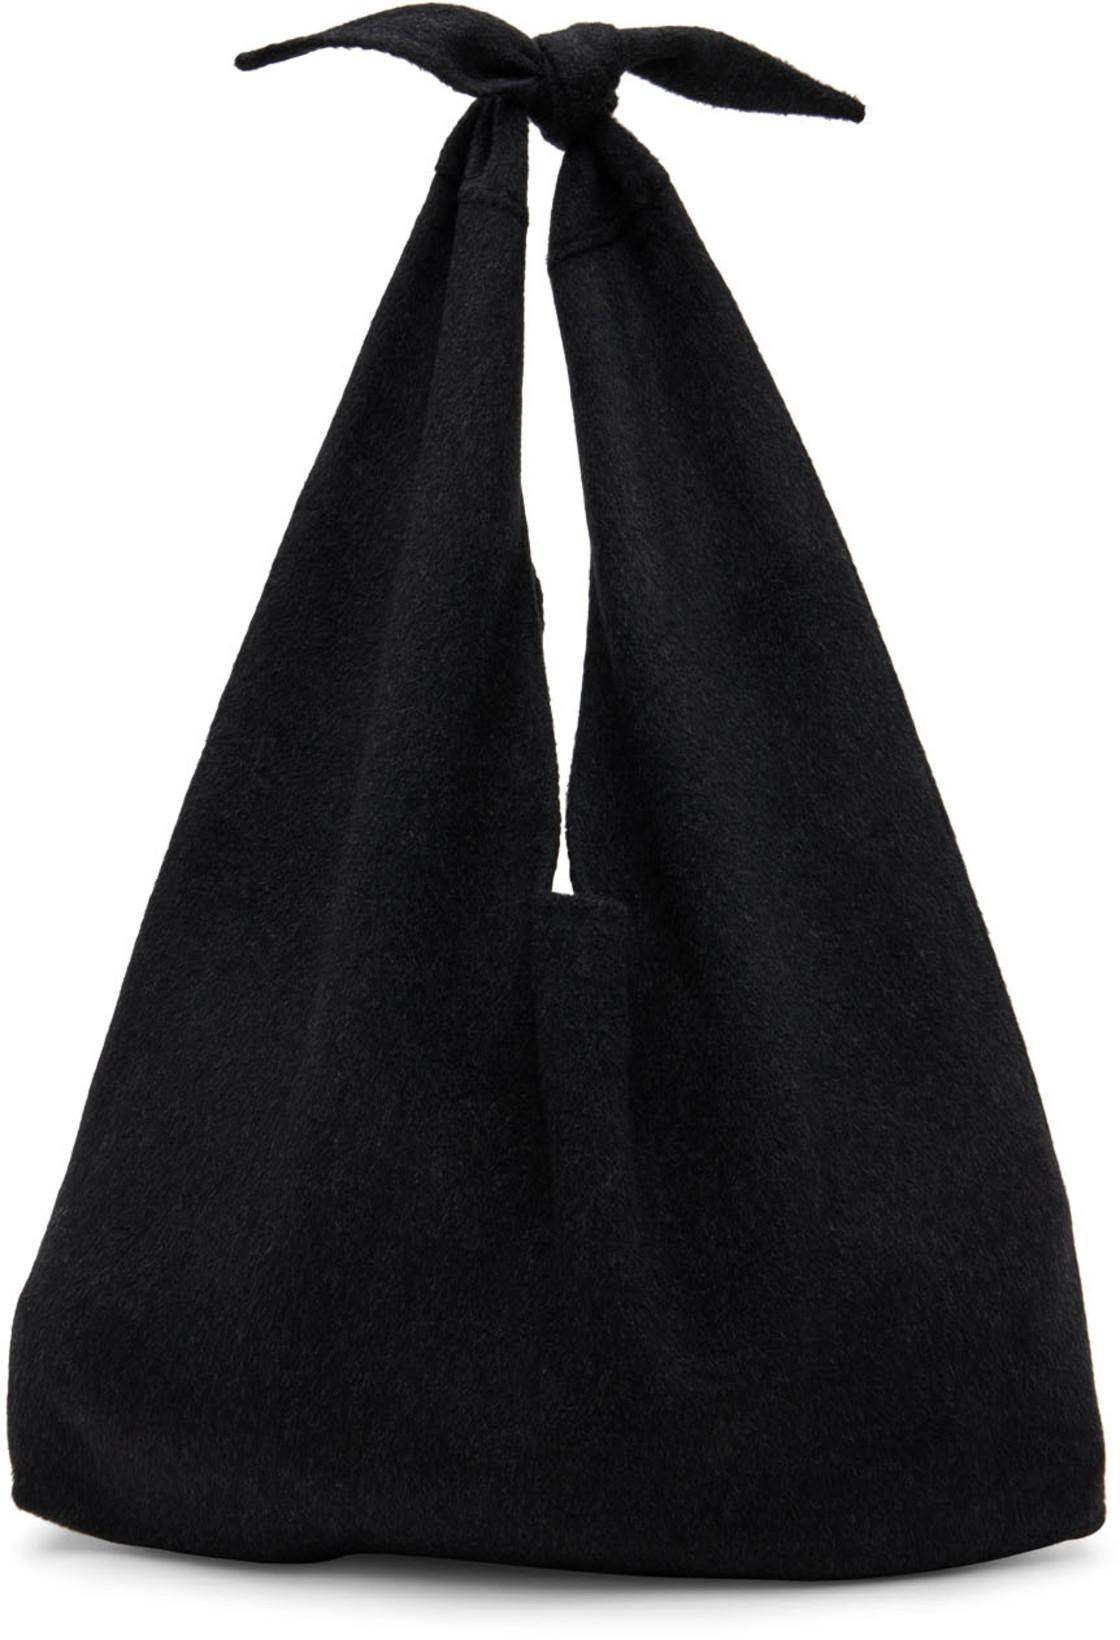 Black Silk Mix Tote by ARCH THE